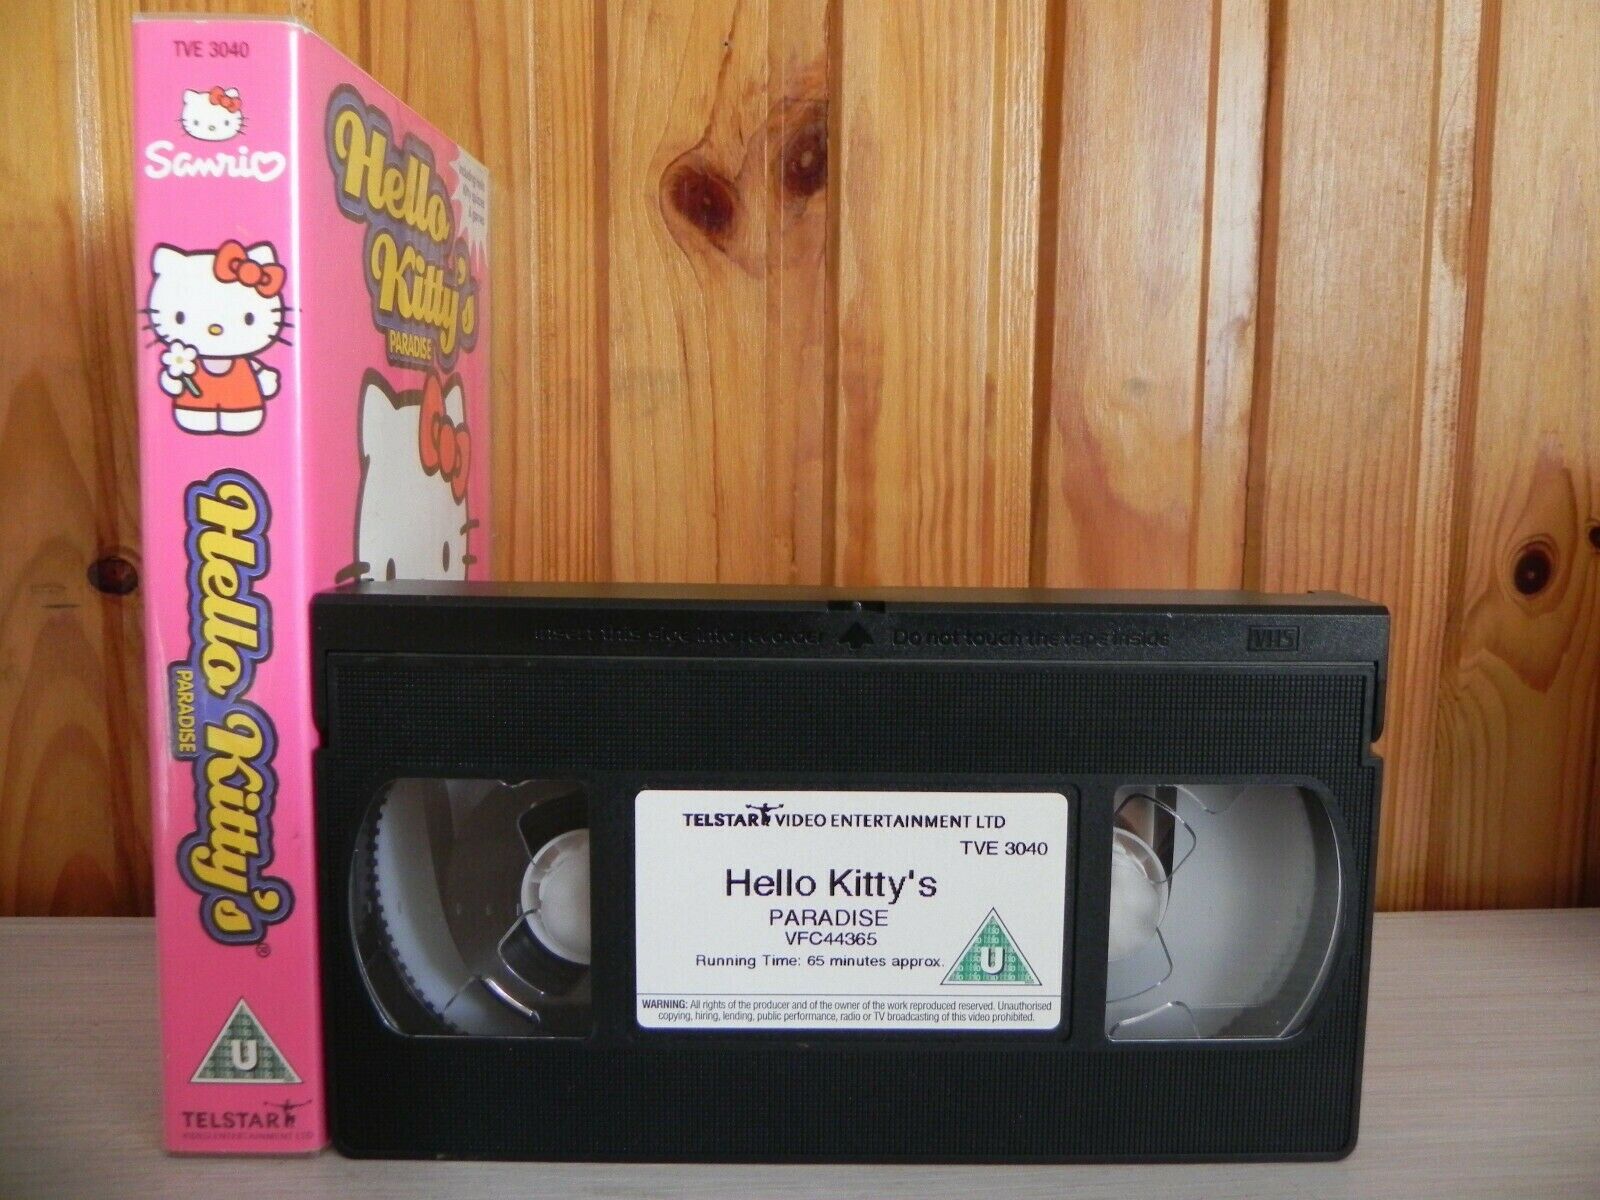 Hello Kitty: Paradise - Watch The Birdie - 6 Animated Stories - Children's - VHS-